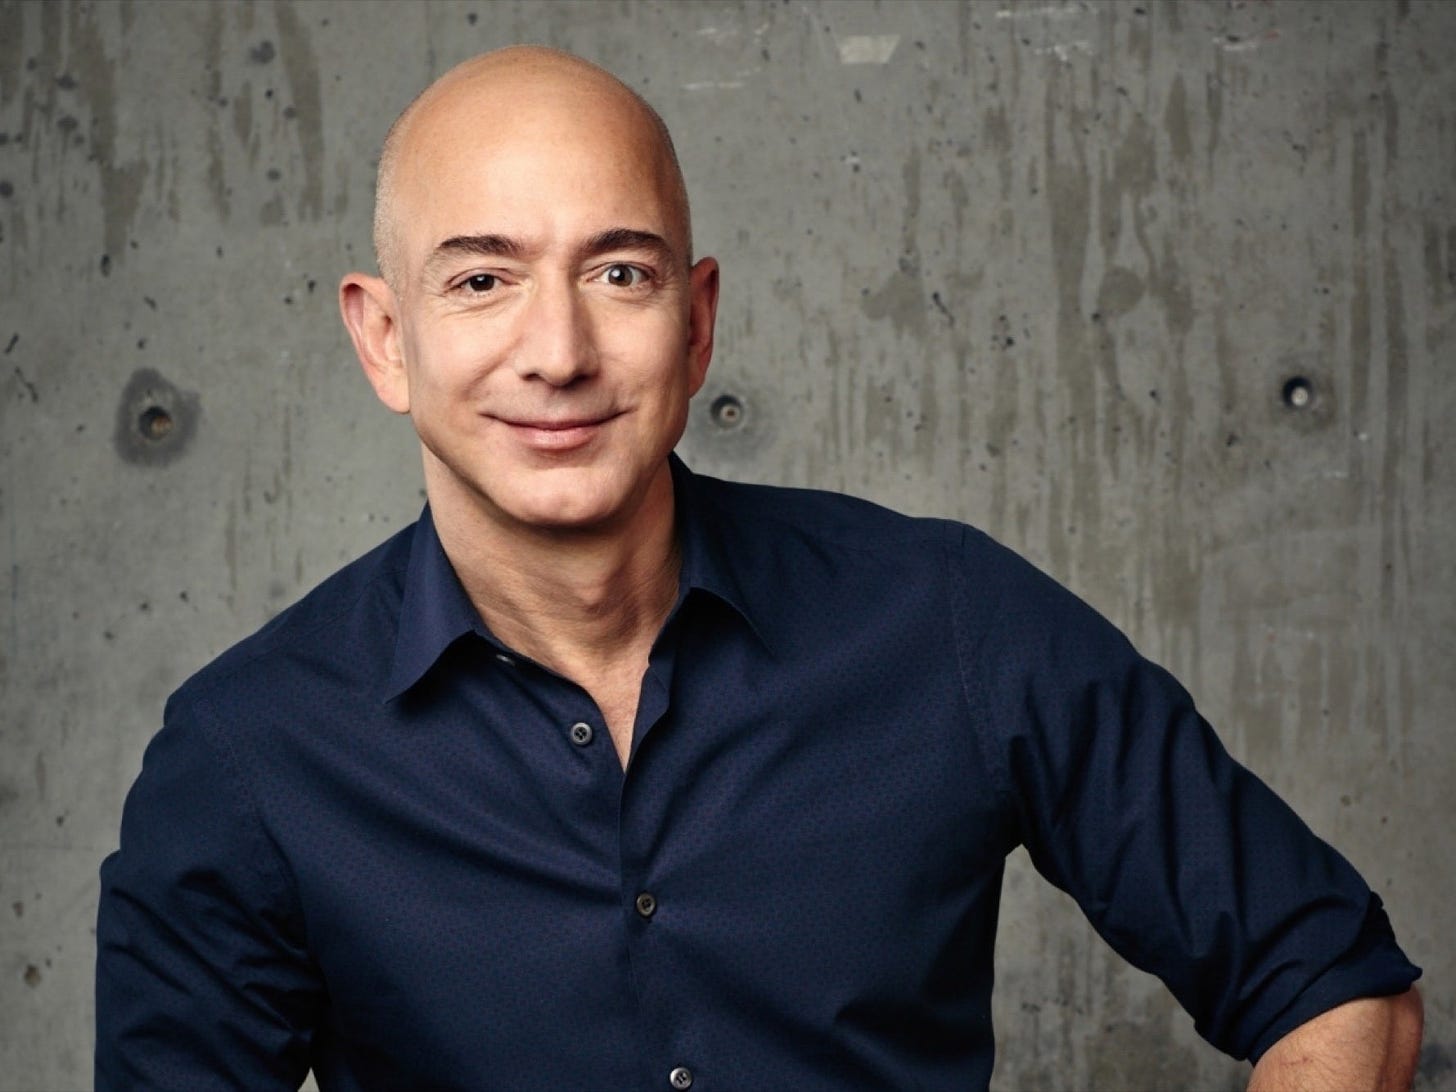 Jeff Bezos Biography - How He Started Amazon and More